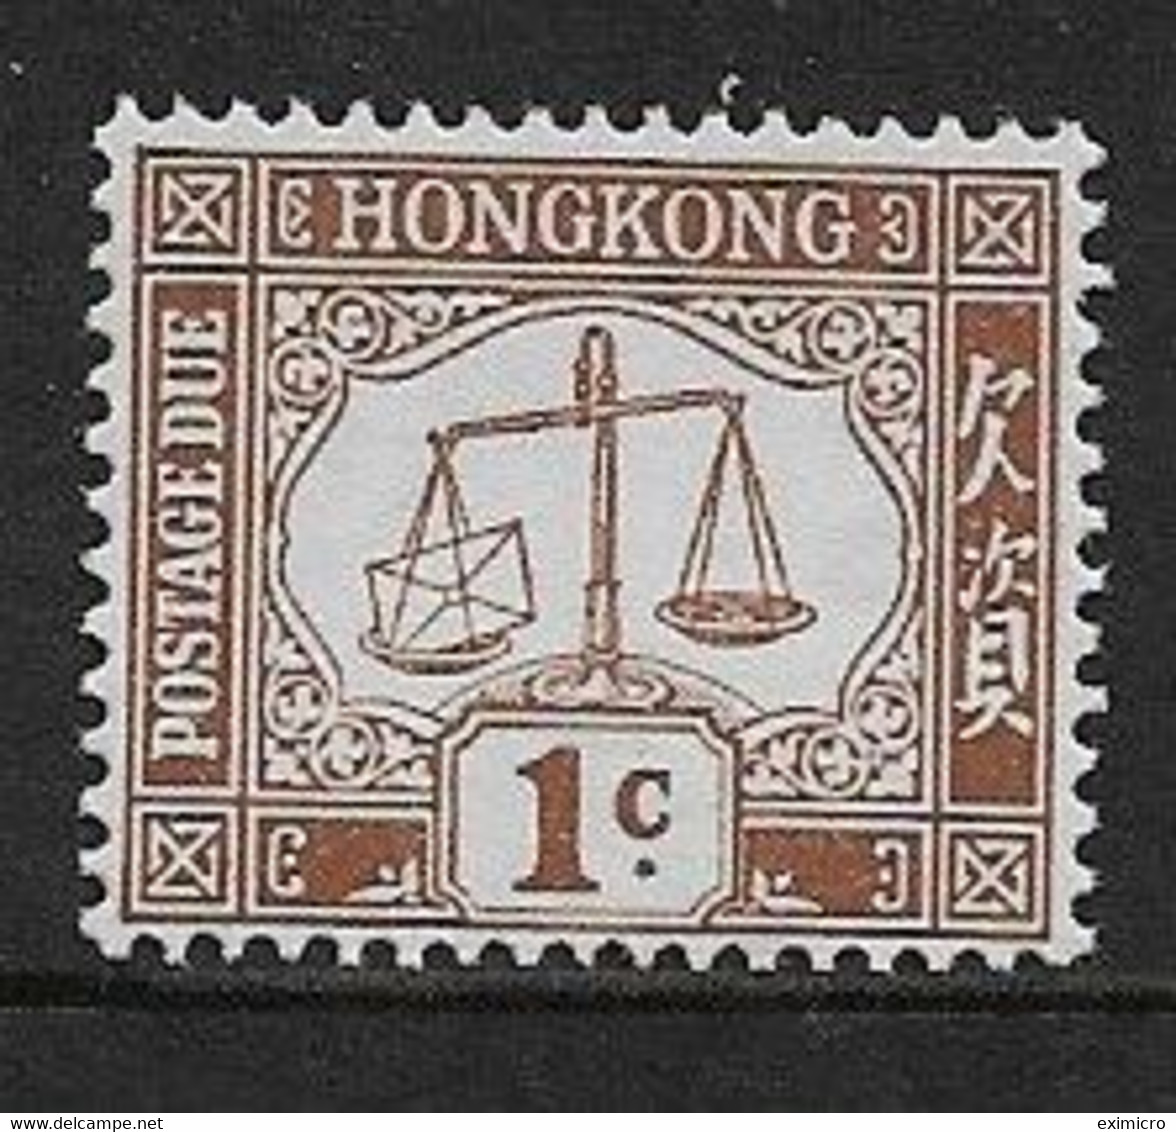 HONG KONG 1923 1c POSTAGE DUE SG D1a LIGHTLY MOUNTED MINT - Postage Due